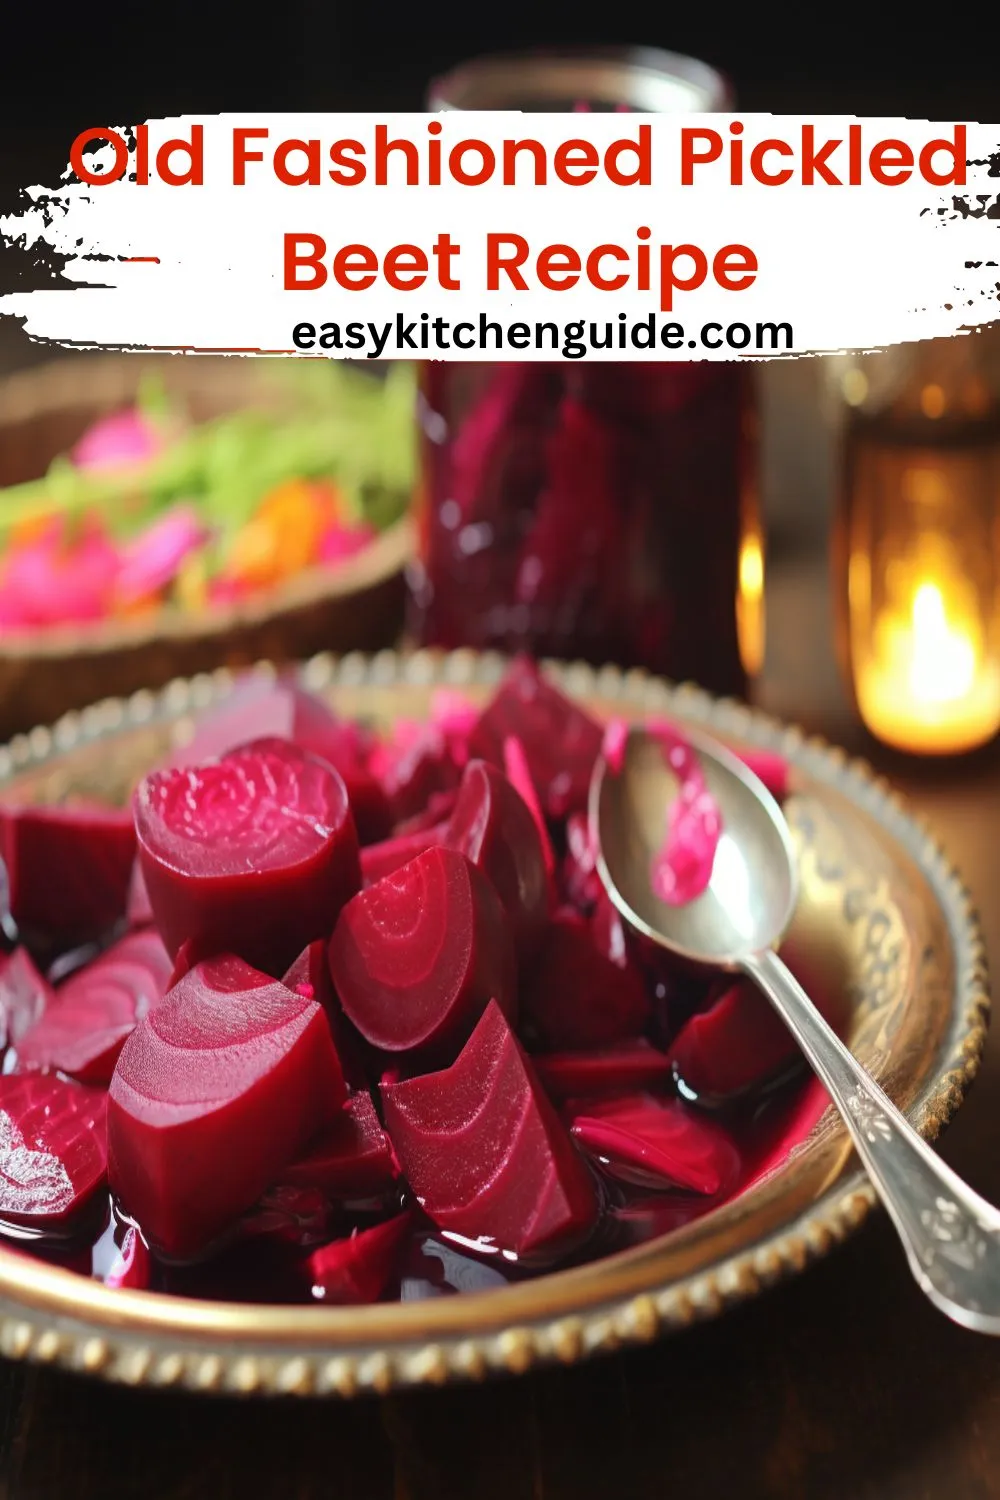 Old Fashioned Pickled Beet Recipe